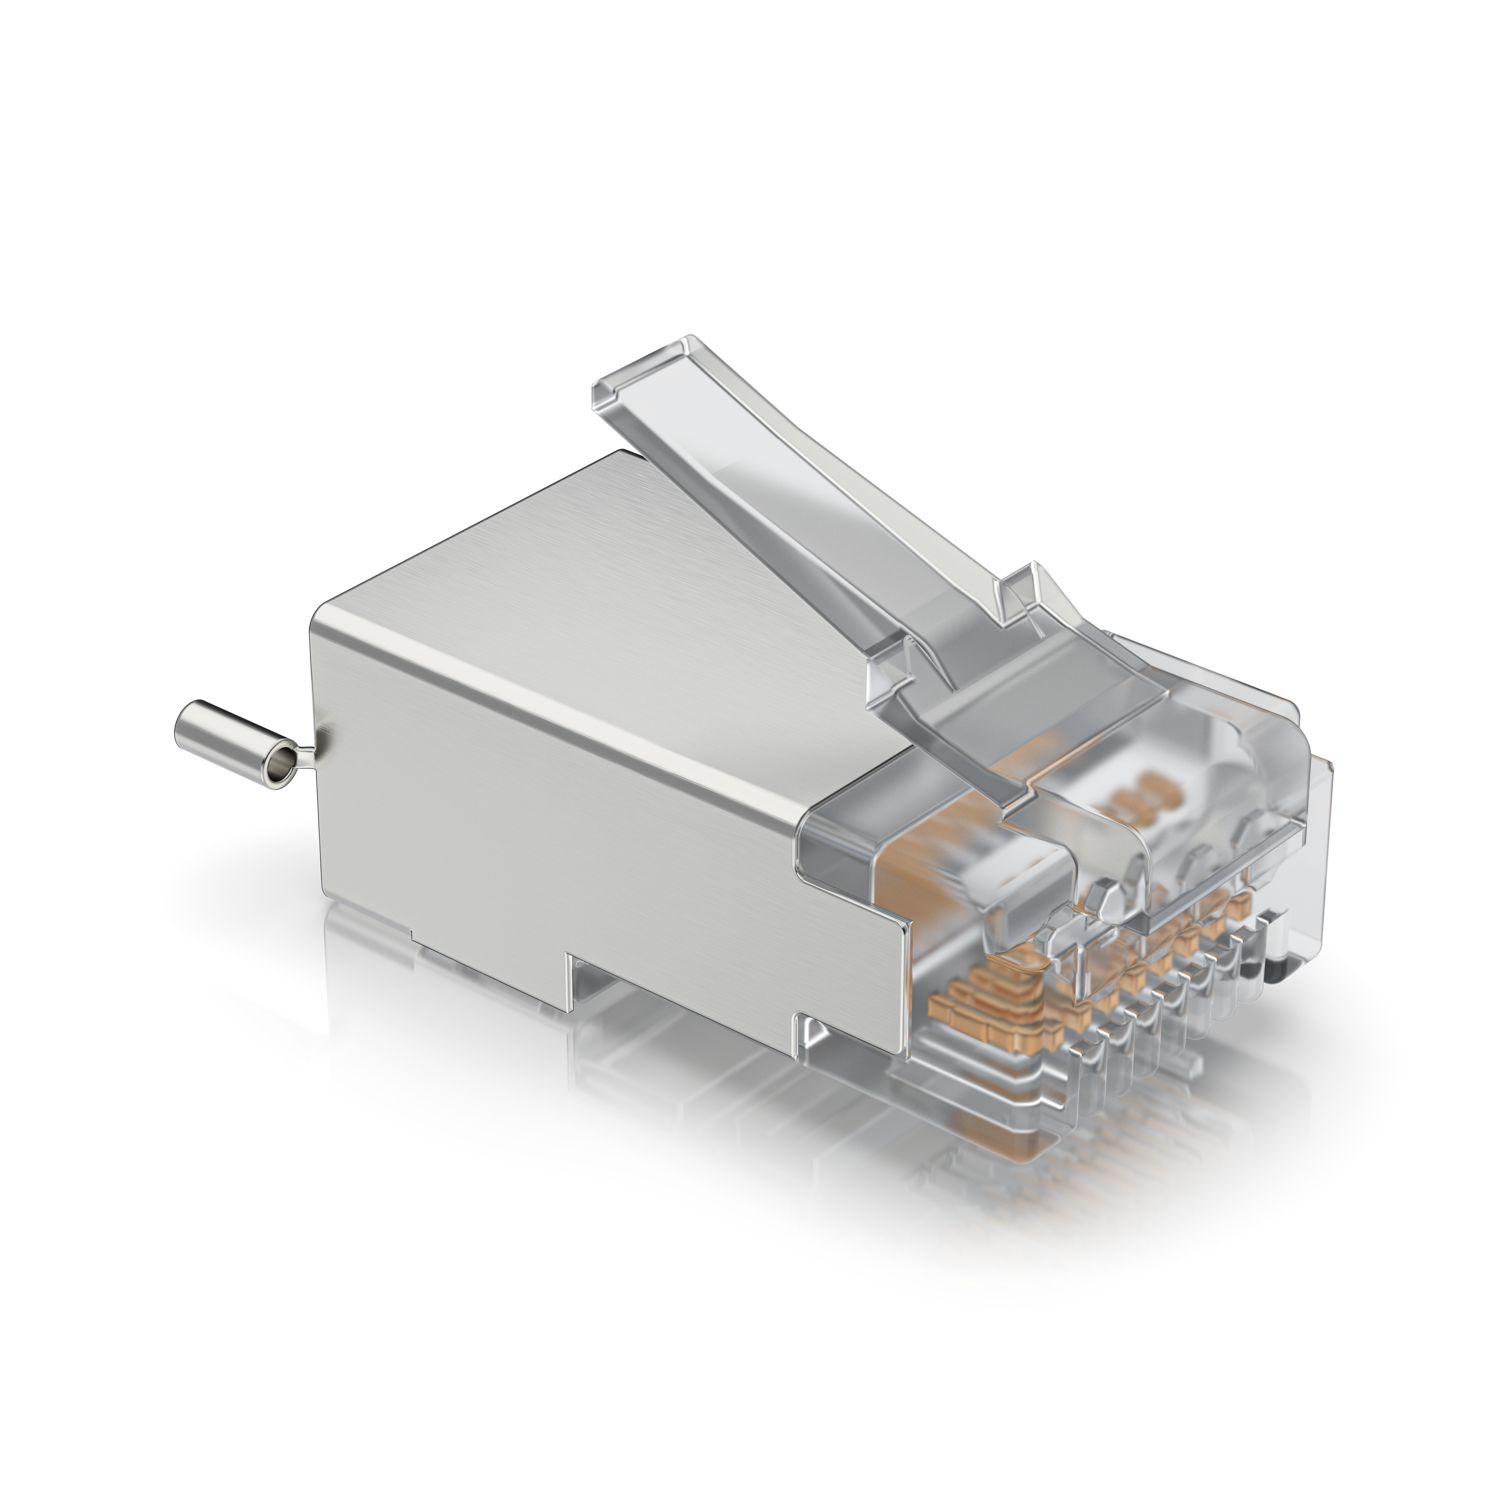 UISP-CONNECTOR-SHD UBIQUITI NETWORKS Networks UISP-Connector-SHD RJ45 Male (x100) connectors per pack